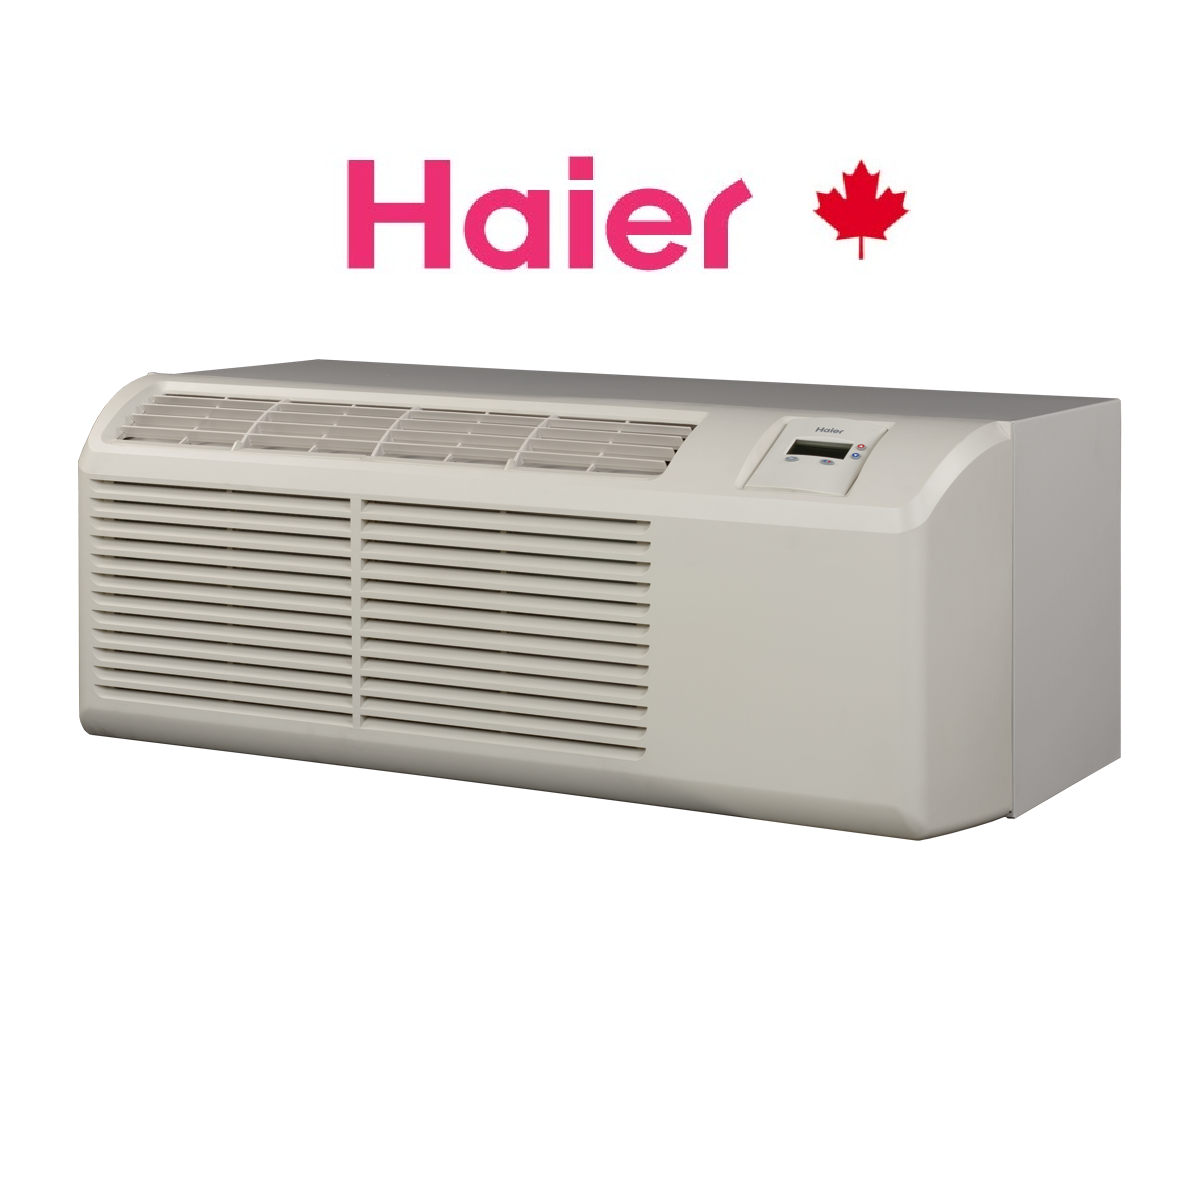 HAIER PTAC UNITS PTHH151UAC HEAT PUMP COOLING AND HEATING